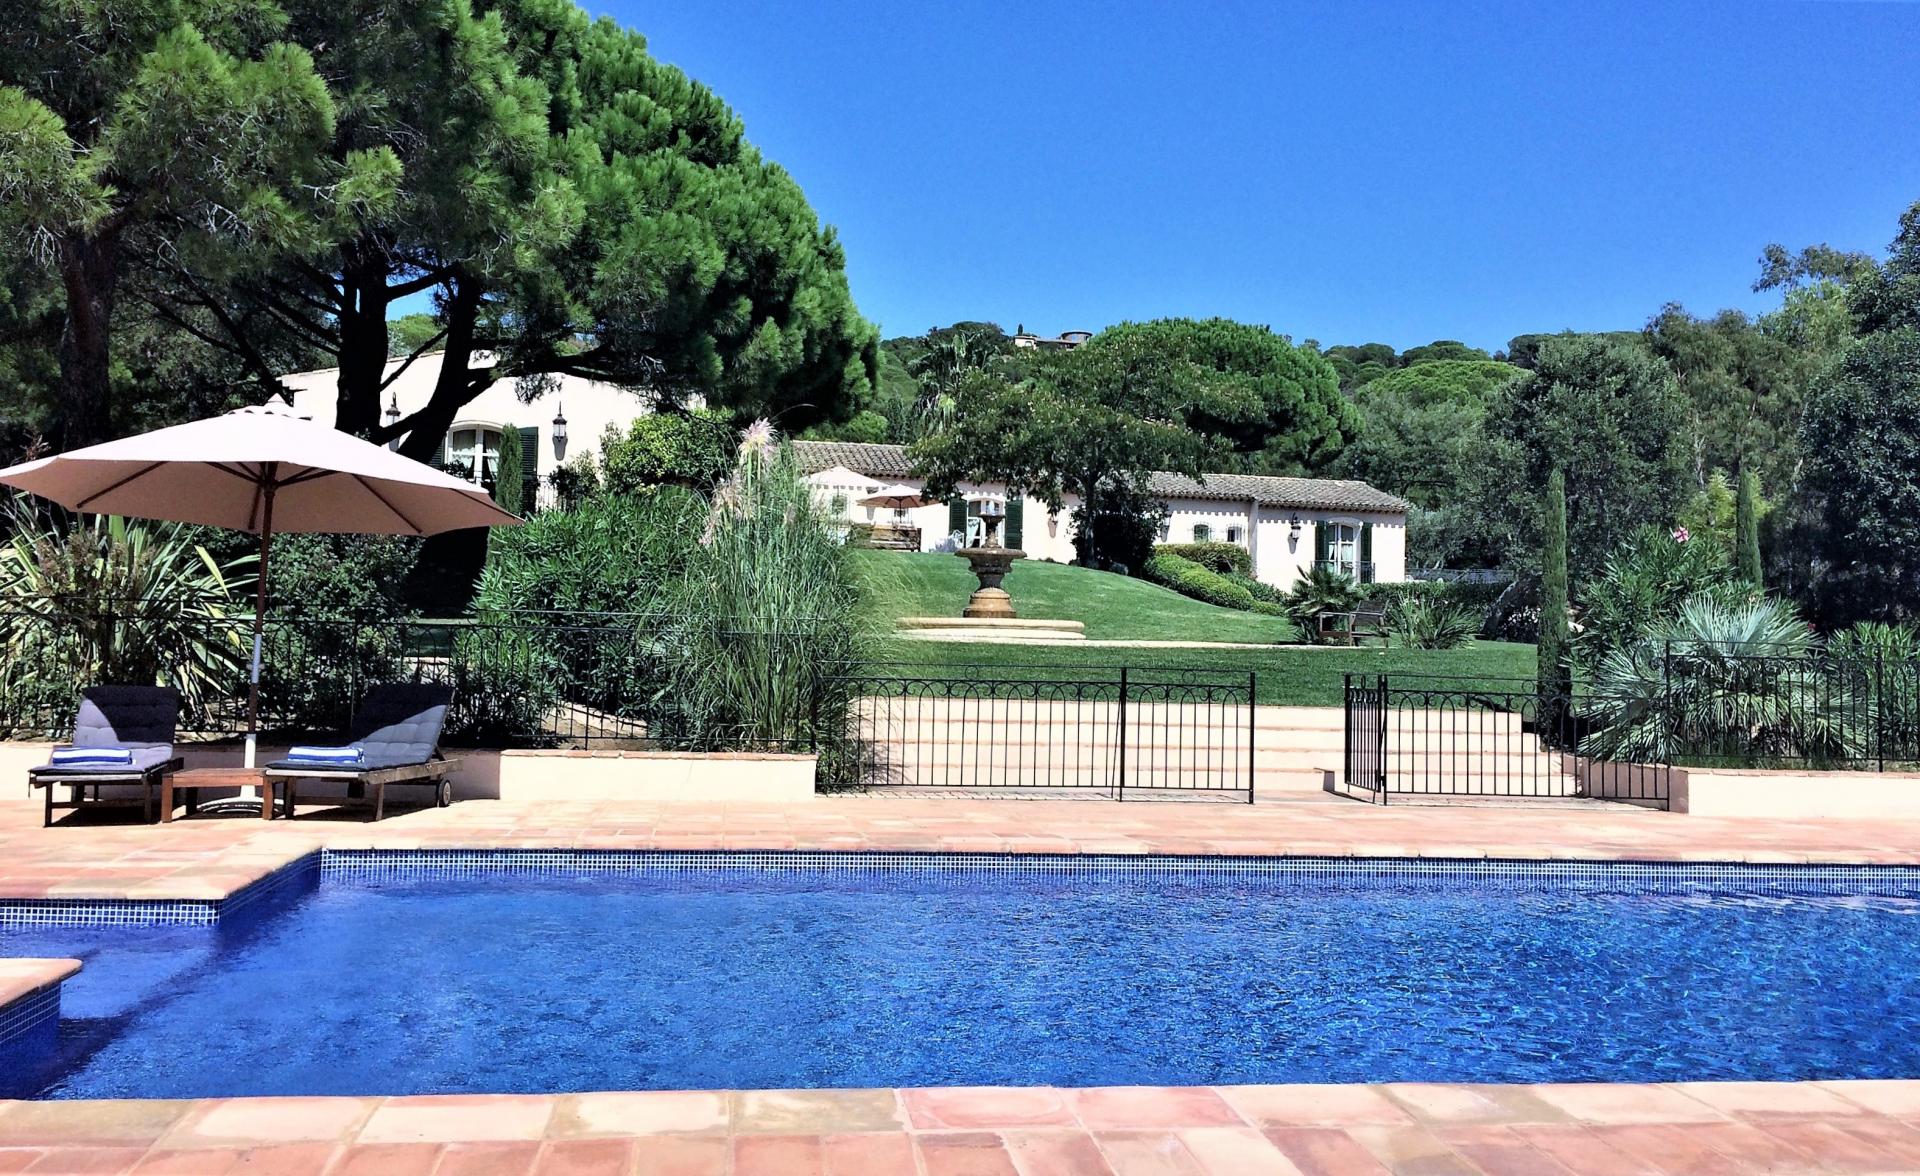 A GATED AND HEATED SWIMMING POOL IN A HOLIDAY VILLA RENTAL IN SOUTH OF FRANCE